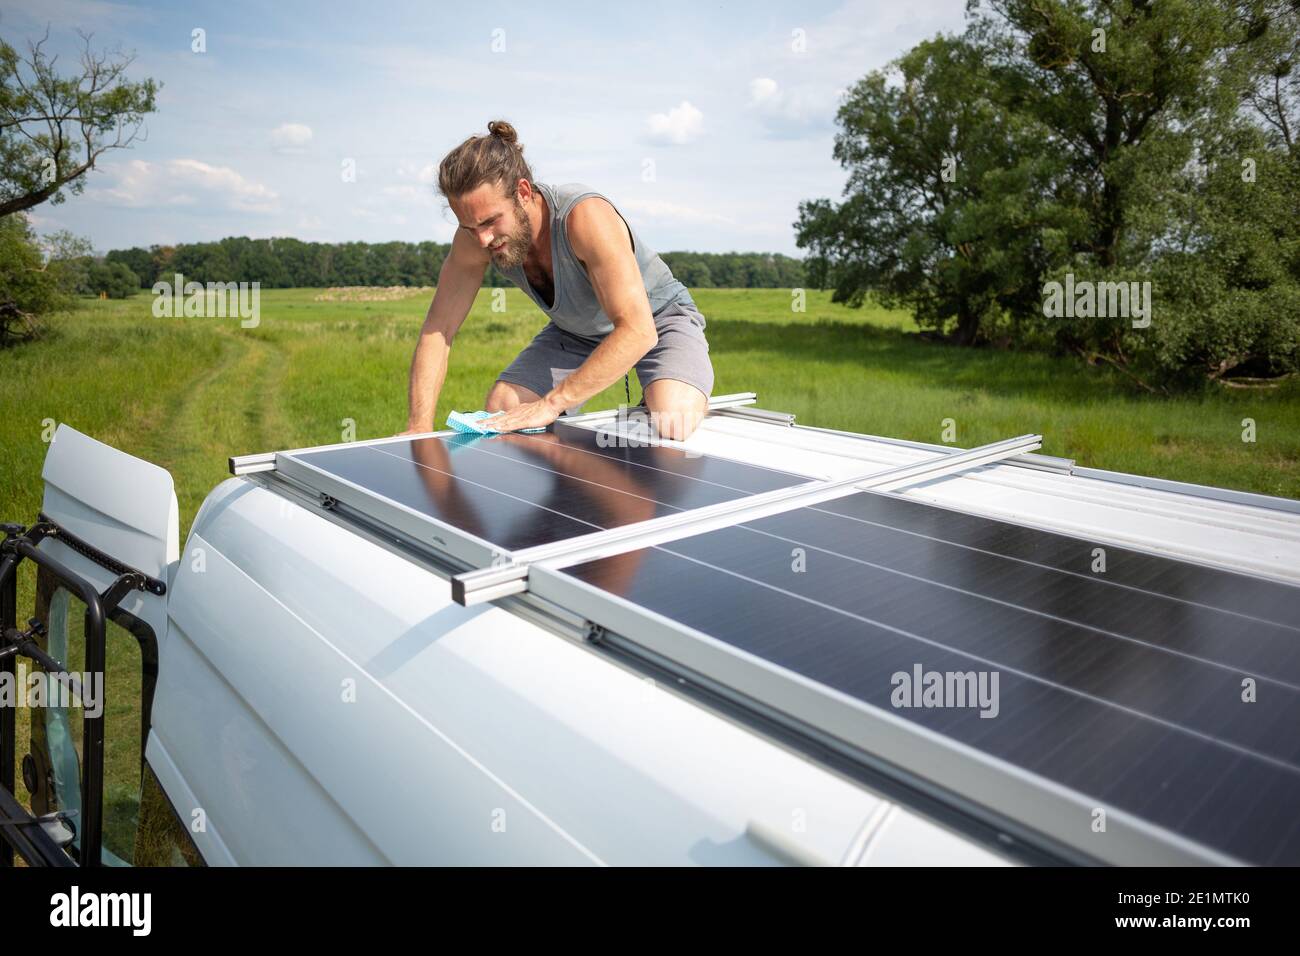 Man wiping a solar panel on top of a camper van Stock Photo